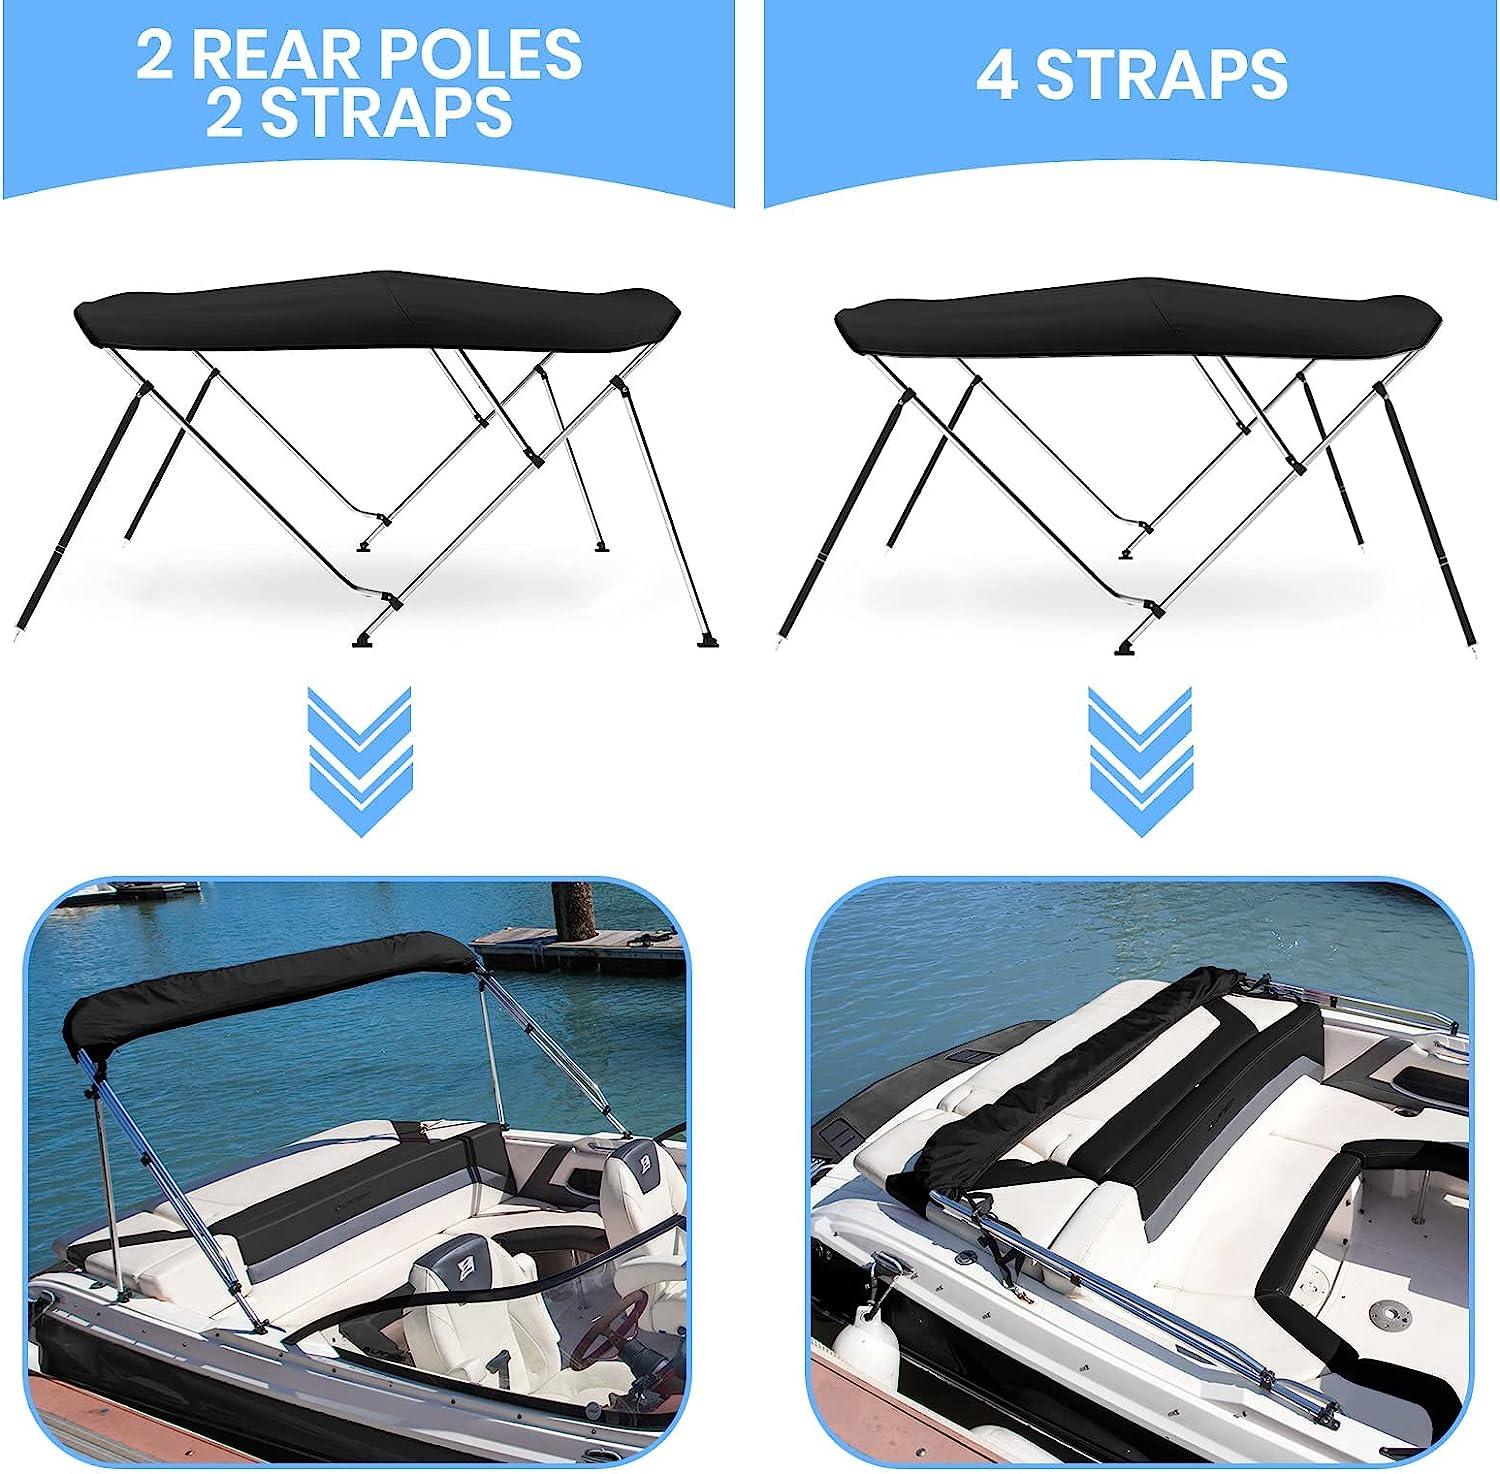 Leader Accessories 10 Colors 3 Bow 4 Bow Bimini Top Cover for Boat